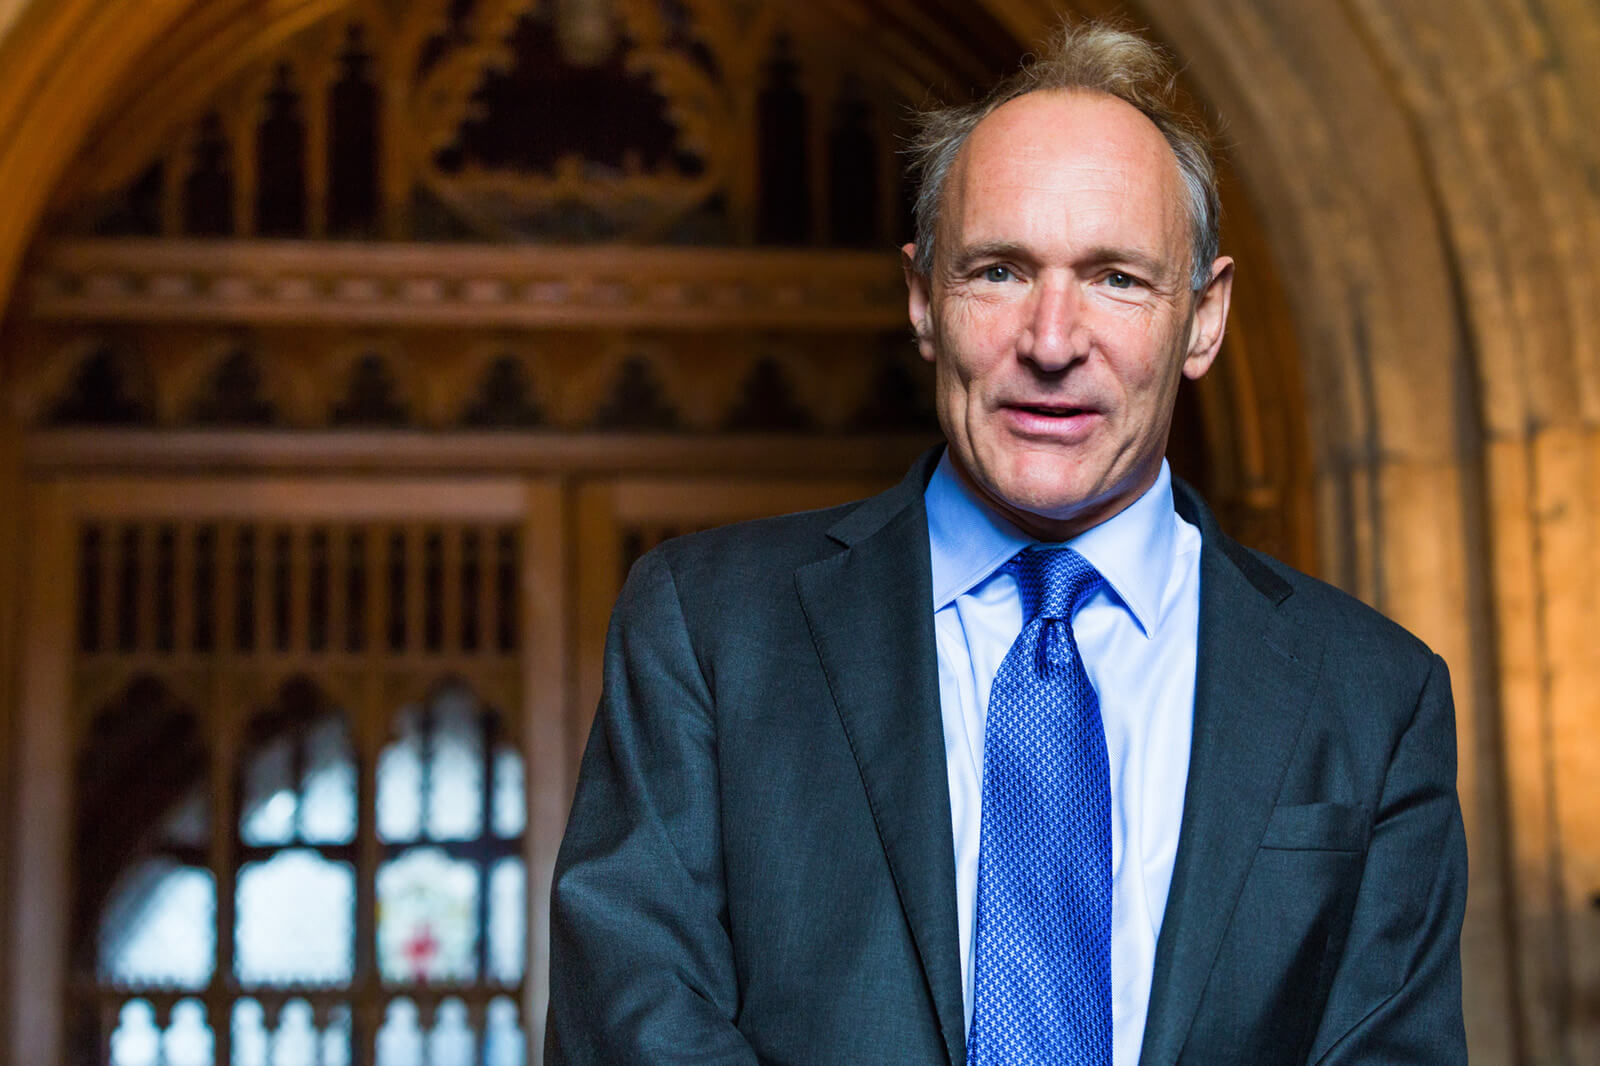 Cryptocurrency slammed as dangerous and gambling by World Wide Web inventor Tim Berners-Lee